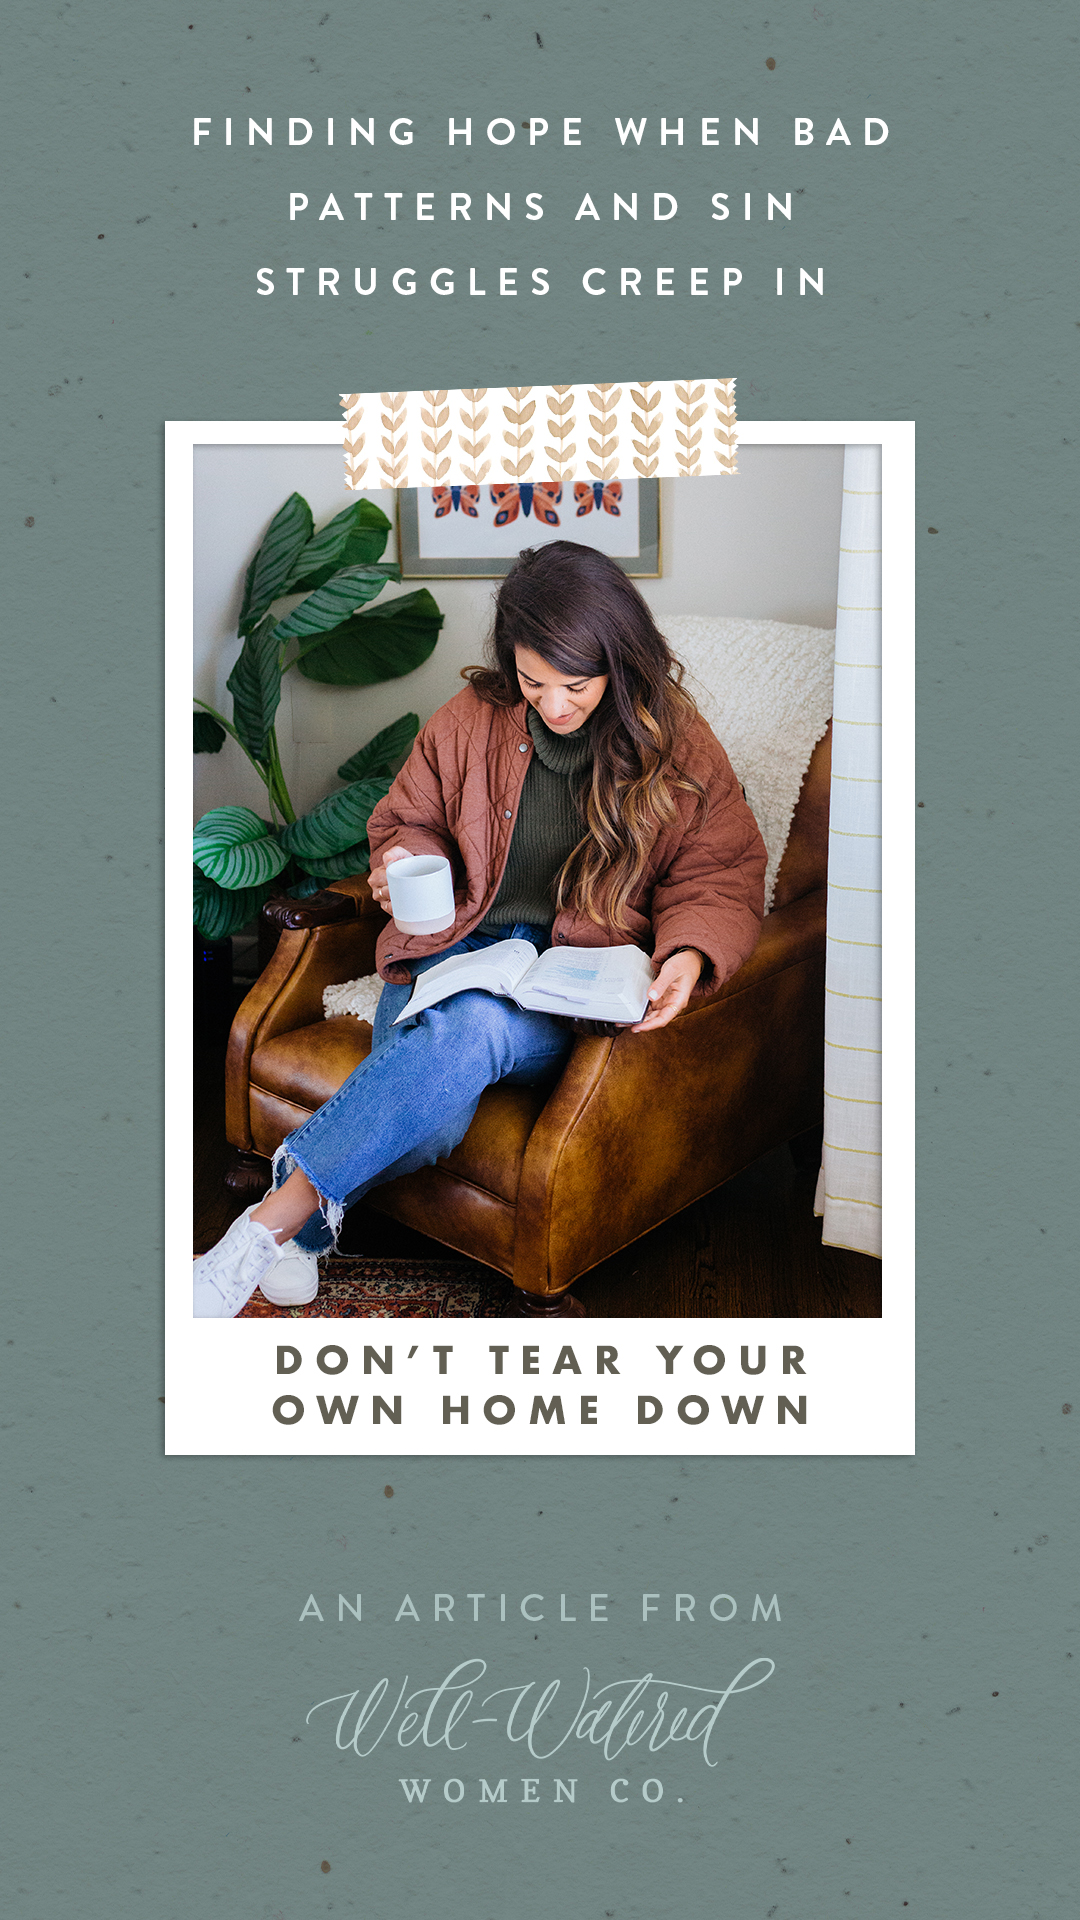 Don't Tear Your Own Home Down-An Article by Well-Watered Women